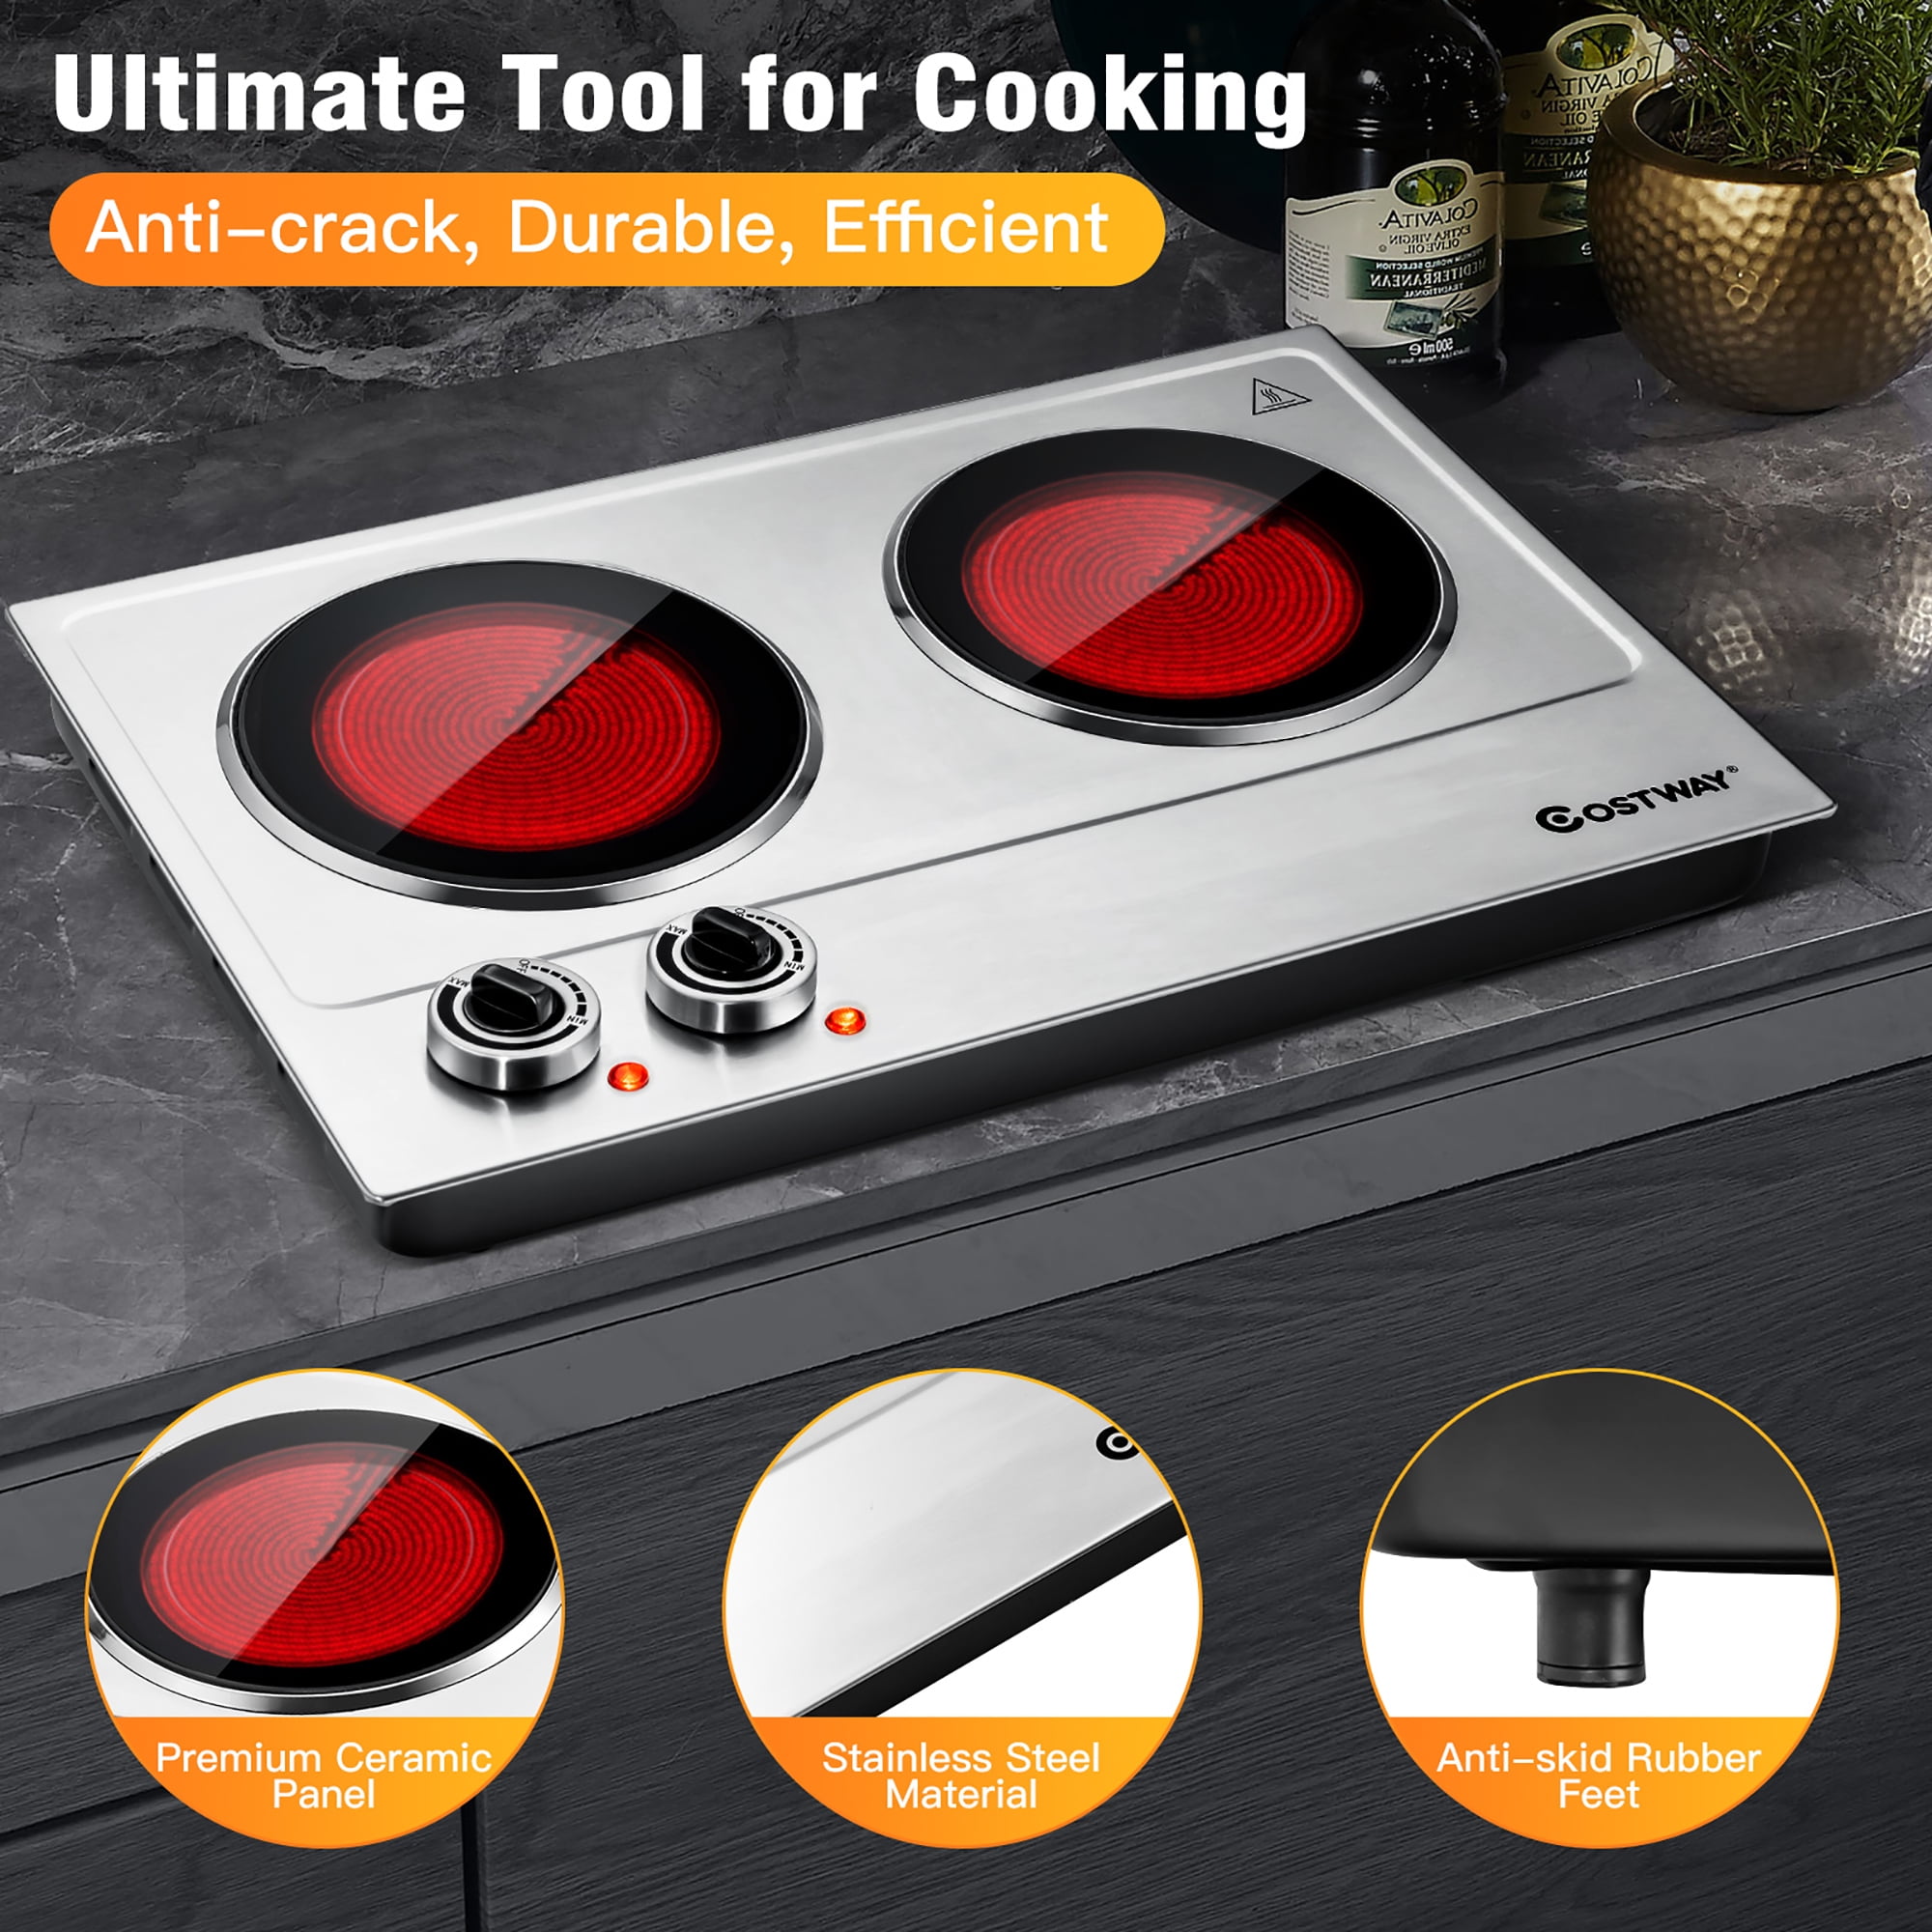 Details about   Costway1800W Stainless Steel Electric Hot Plate Ceramic Double Infrared Burner 